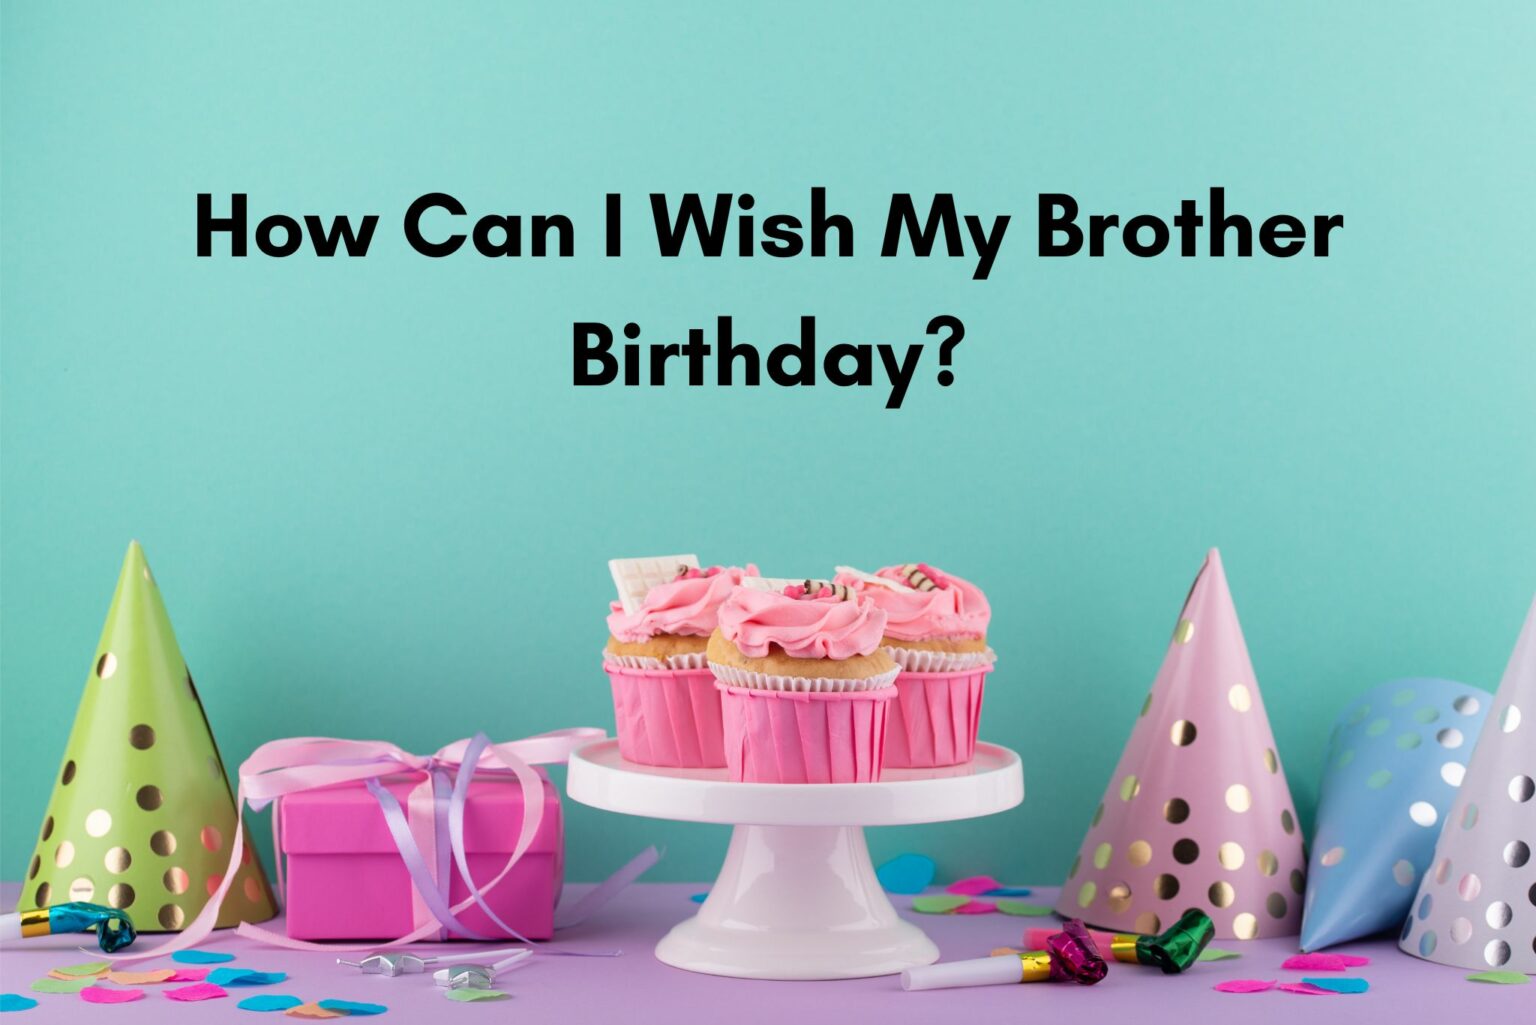 How Can I Wish My Brother Birthday? - MOM News Daily